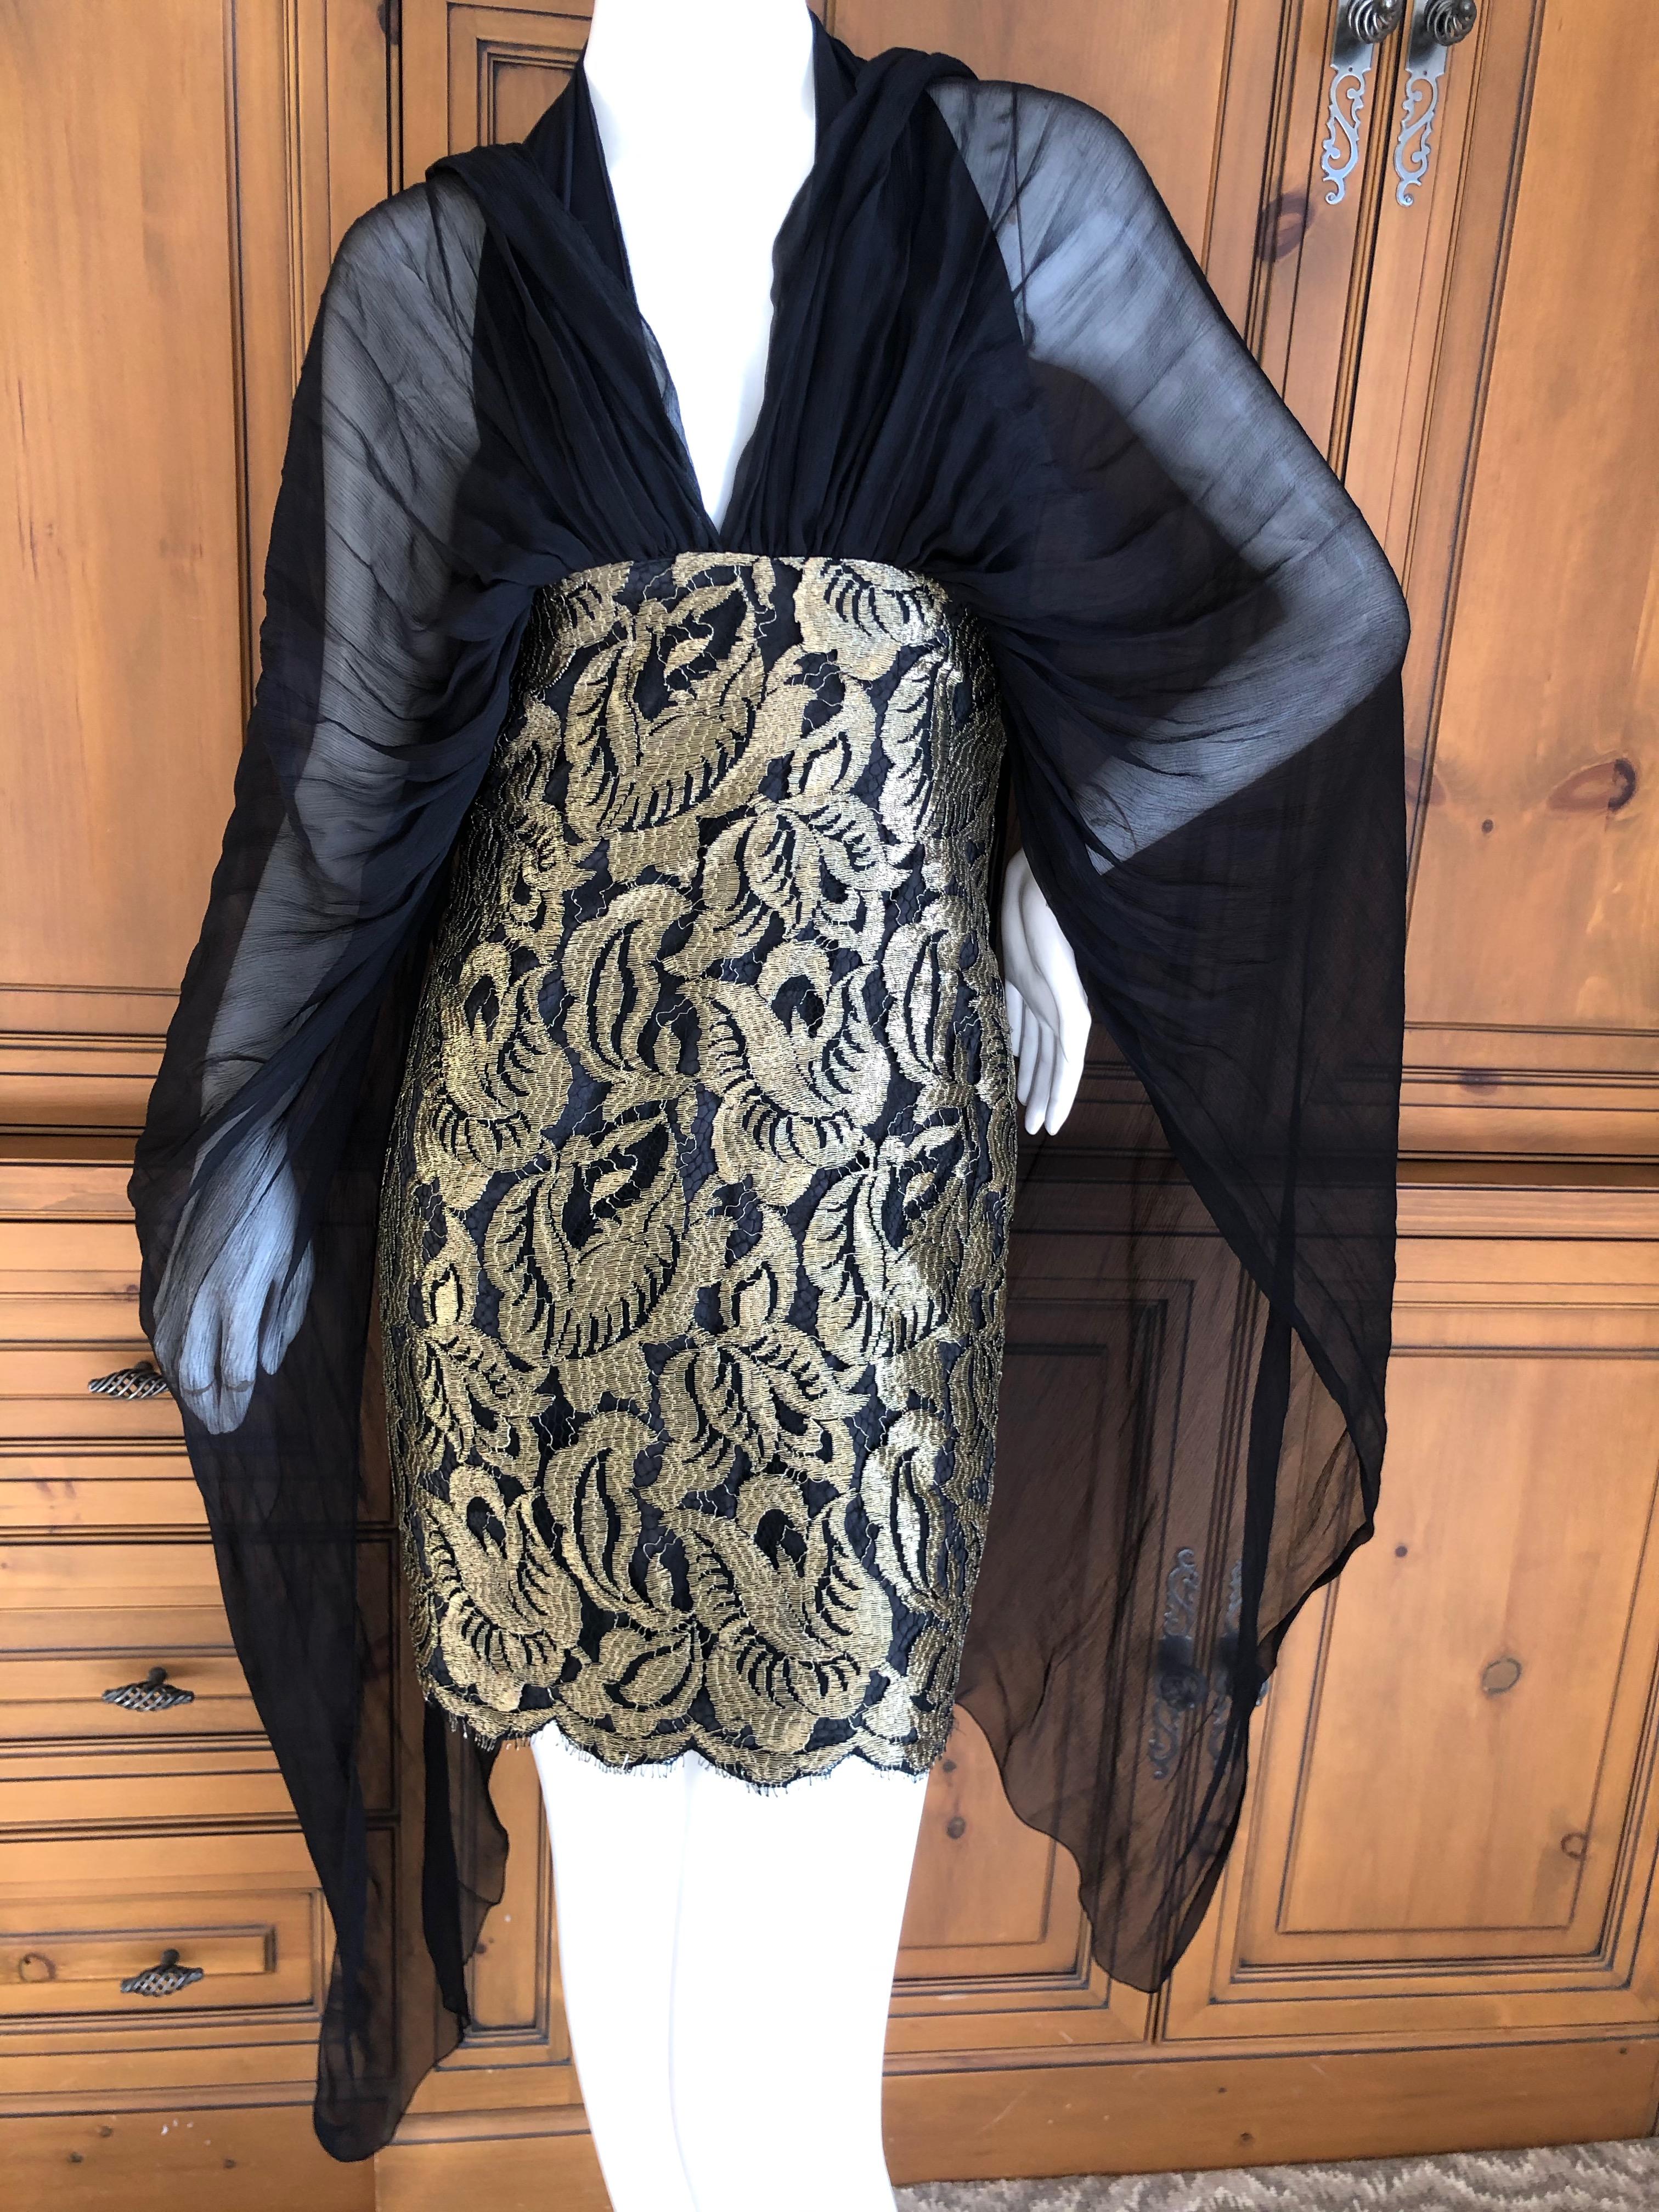 Christian Lacroix Vintage Sheer Black and Gold Lace Cocktail Dress In Excellent Condition For Sale In Cloverdale, CA